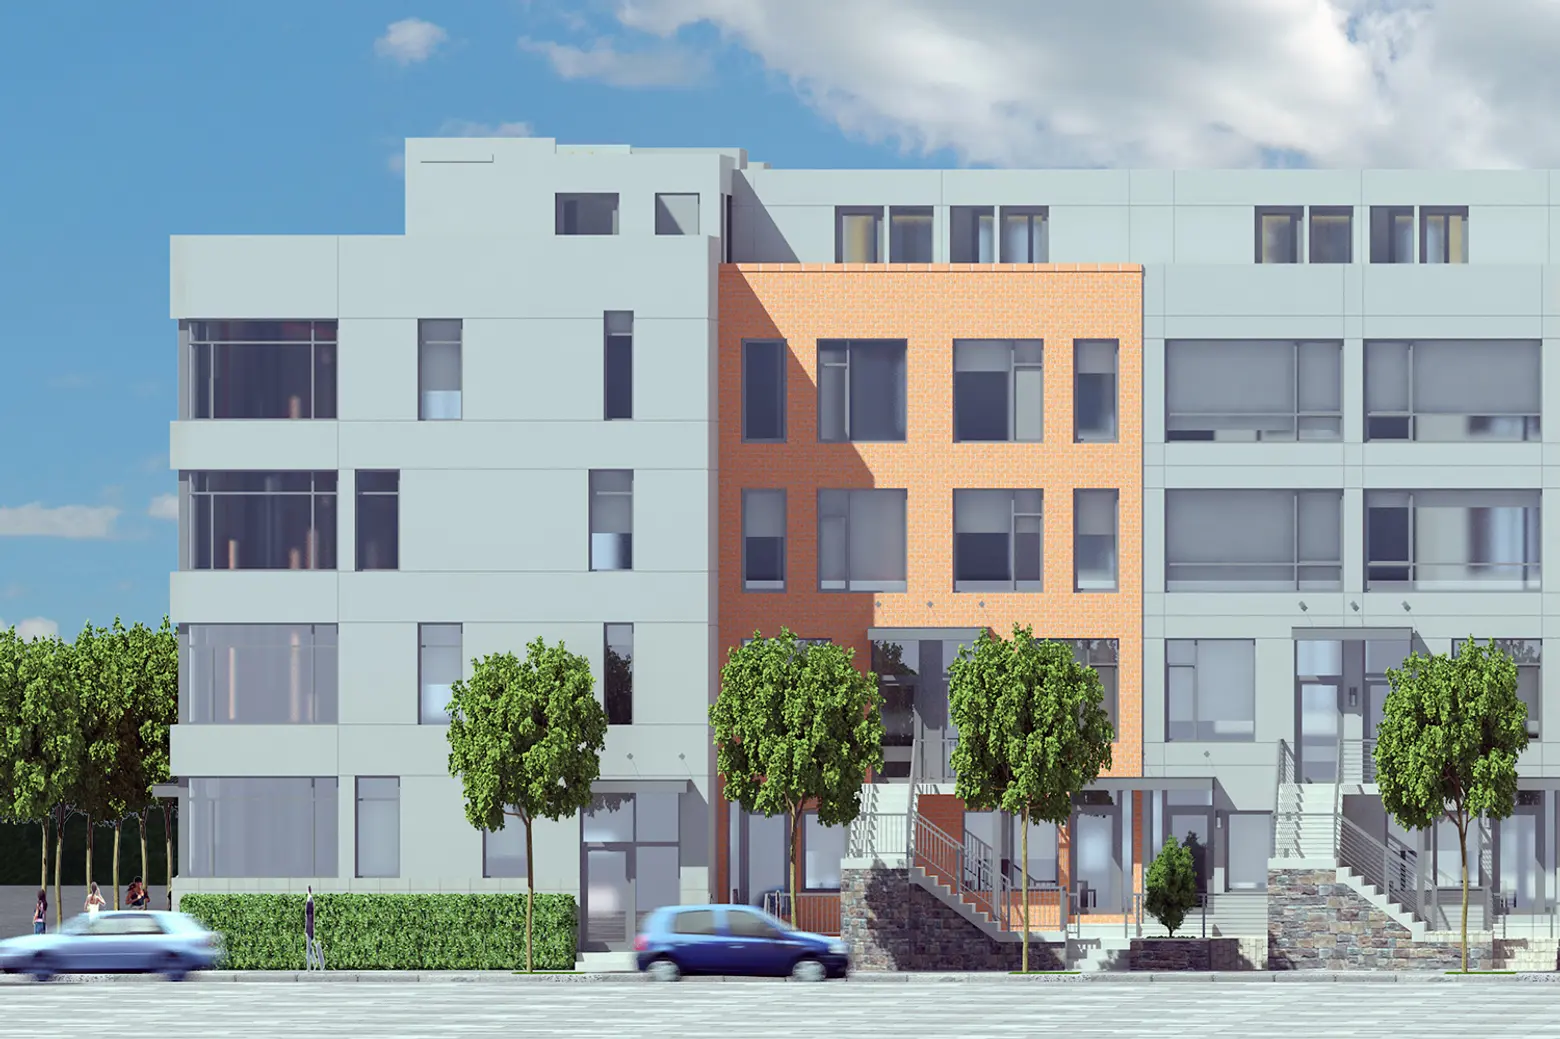 REVEALED: First Look at GDC Properties’ Townhouses Coming to Long Island City